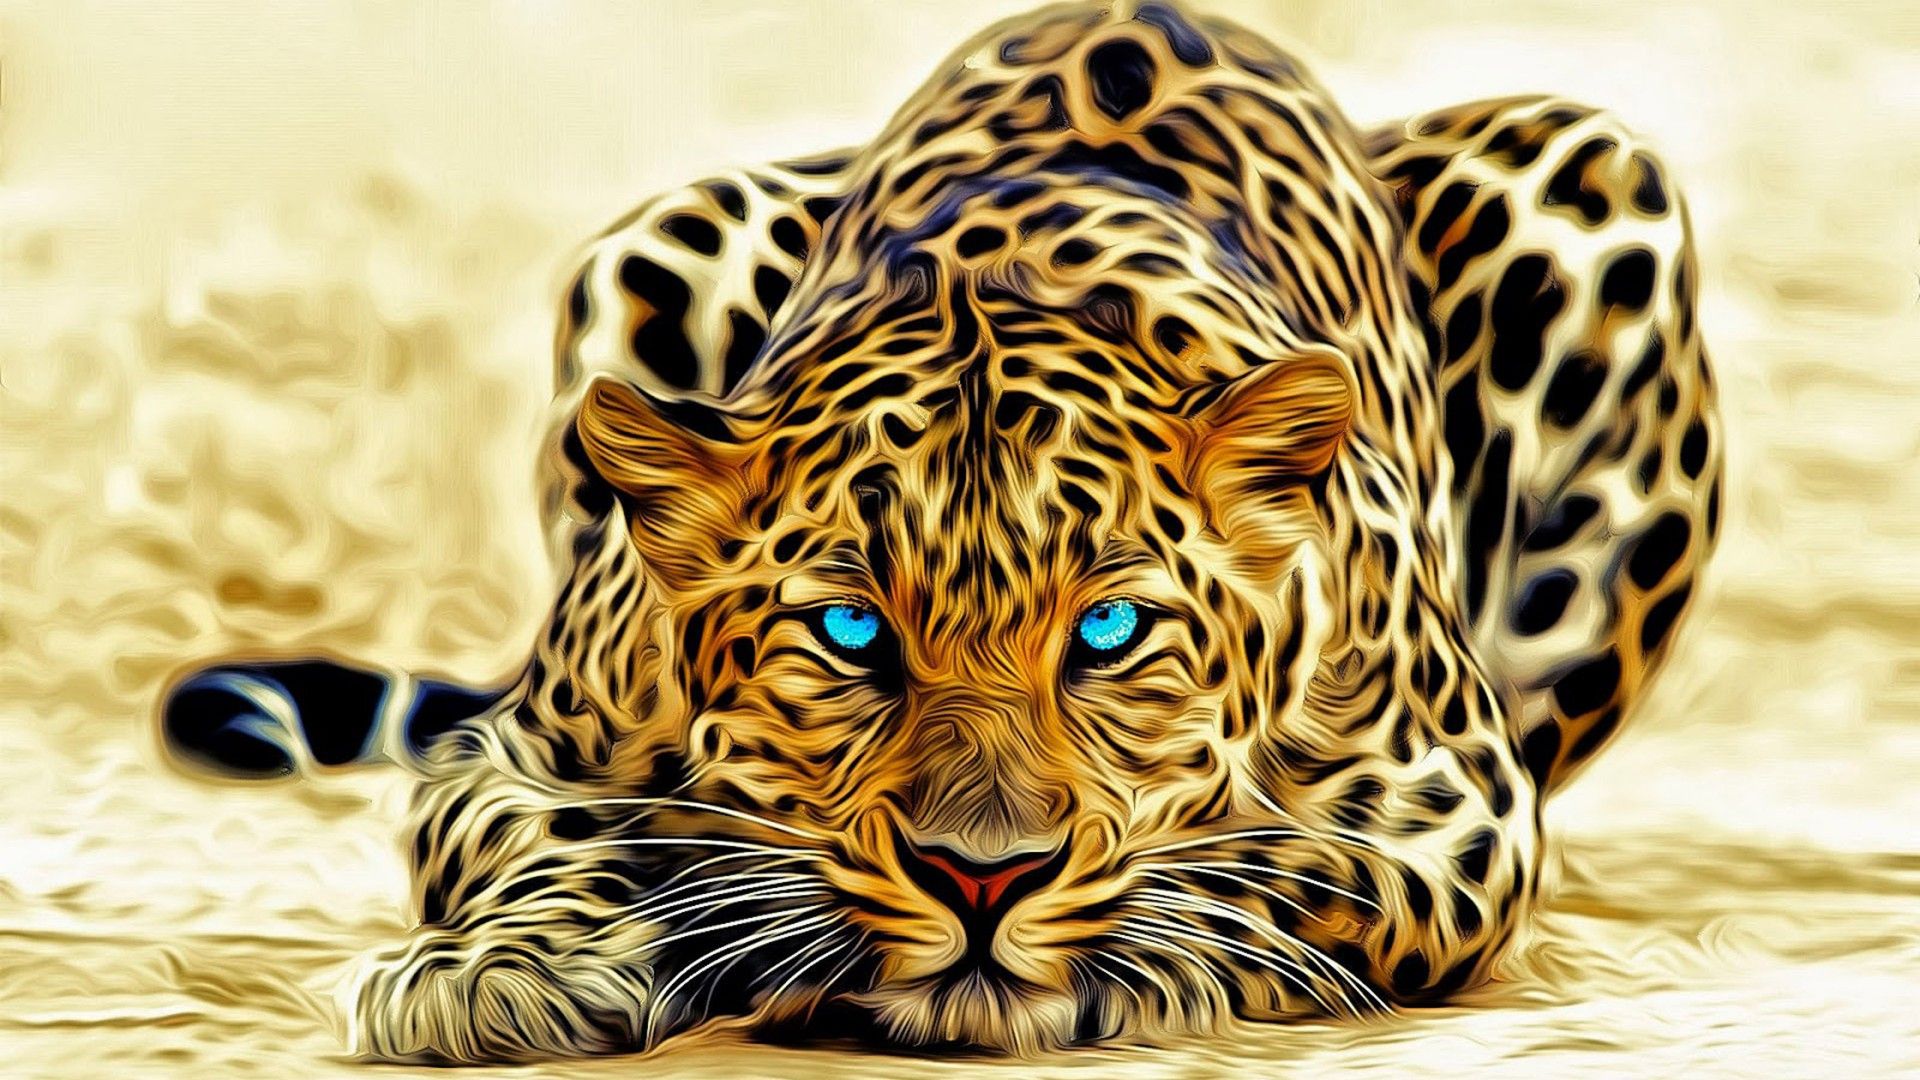 Download running cheetah live wallpaper HD Book Source for free download HD, 4K & high quality wallpaper